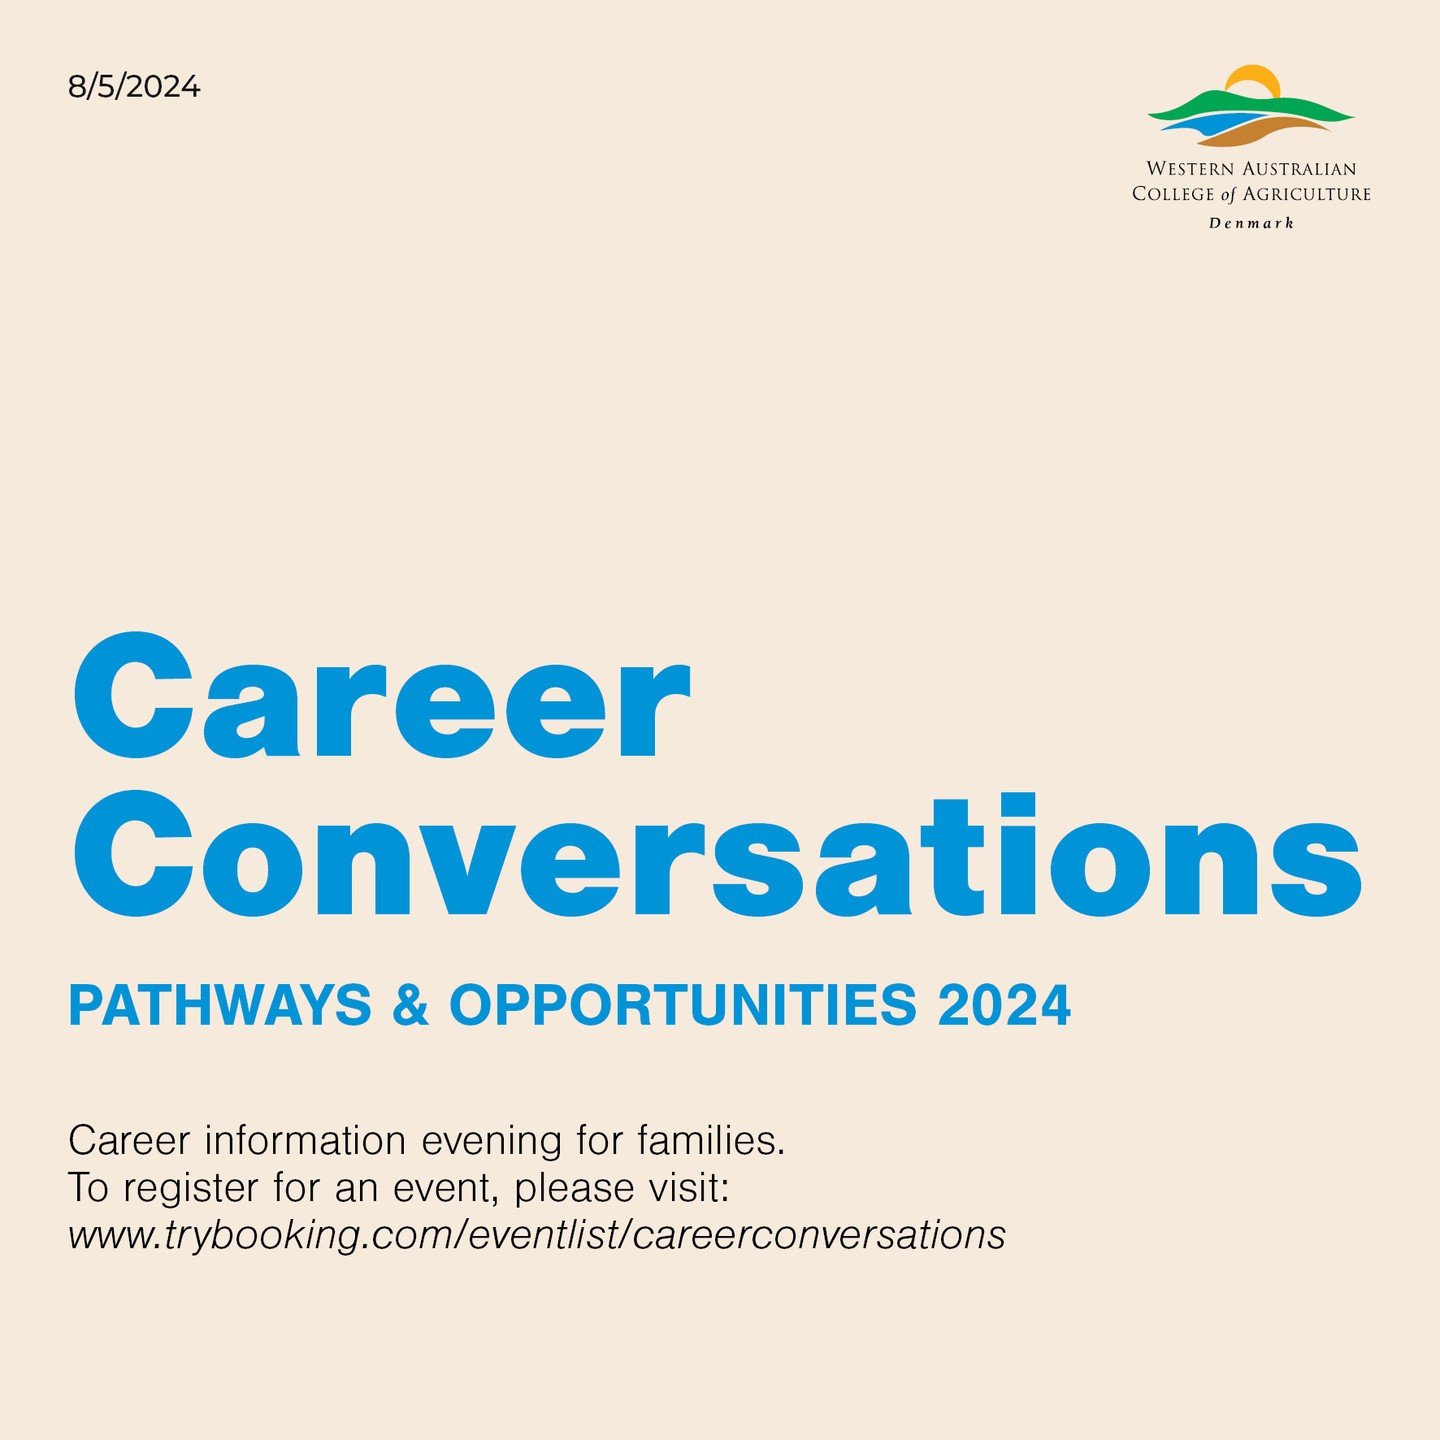 Career Conversations for families in remote and rural areas. These information evenings provide up-to-date information about different pathways open to young people. Join the conversation about post school options at these free events in your local a